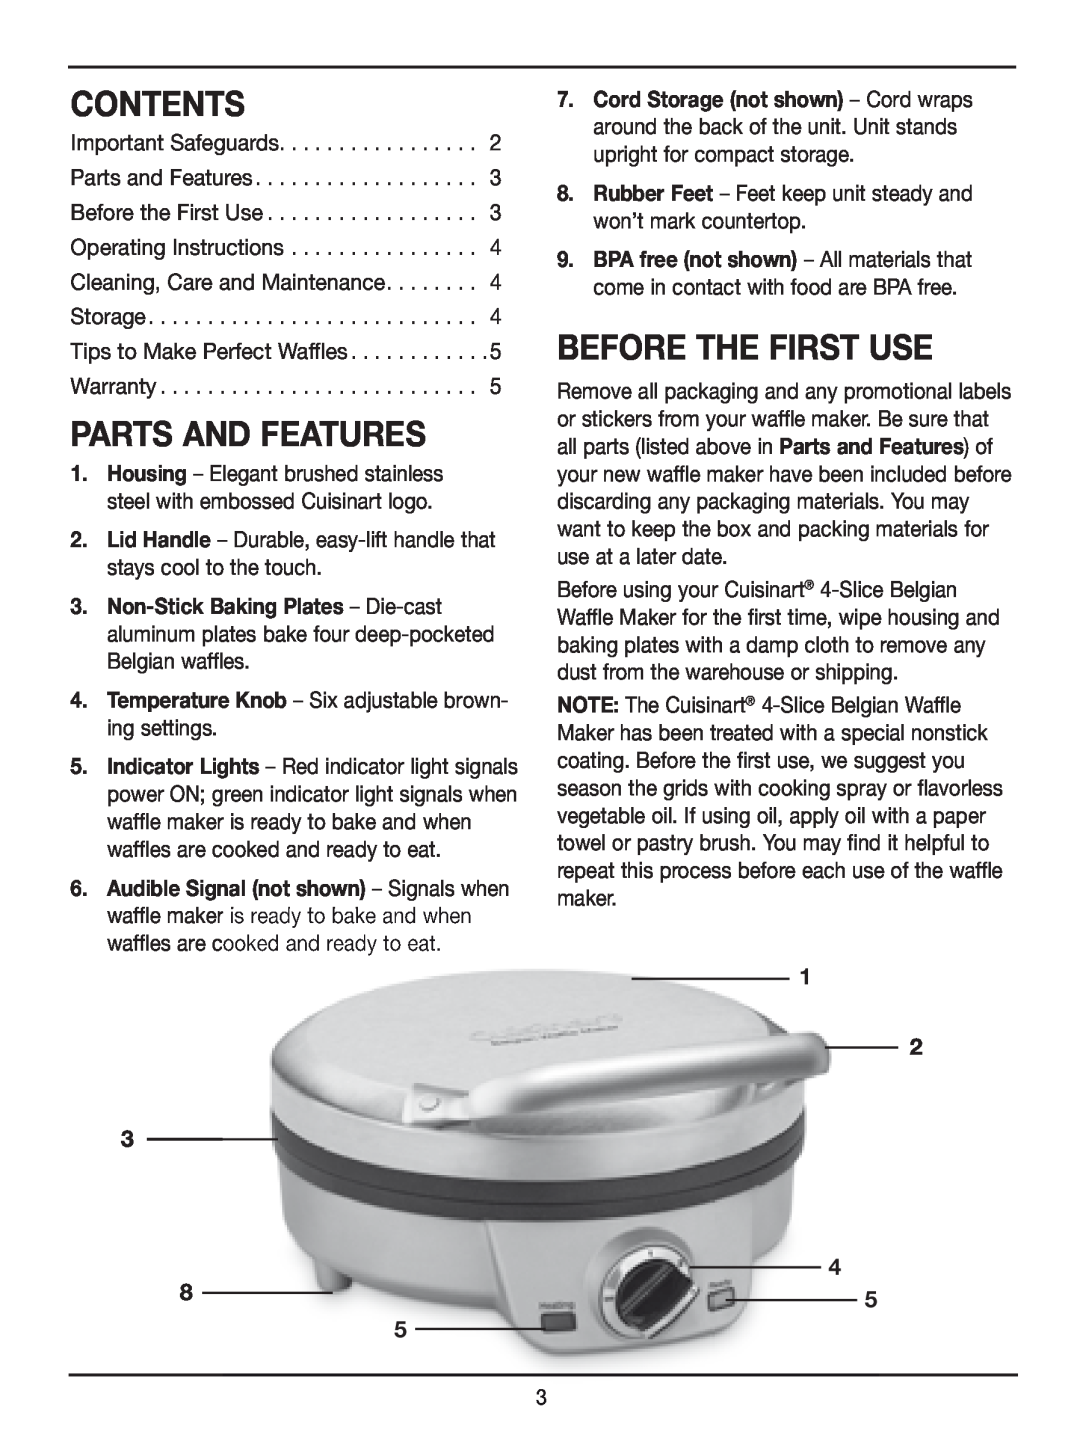 Cuisinart WAF-2OO manual Contents, Parts And Features, Before The First Use 